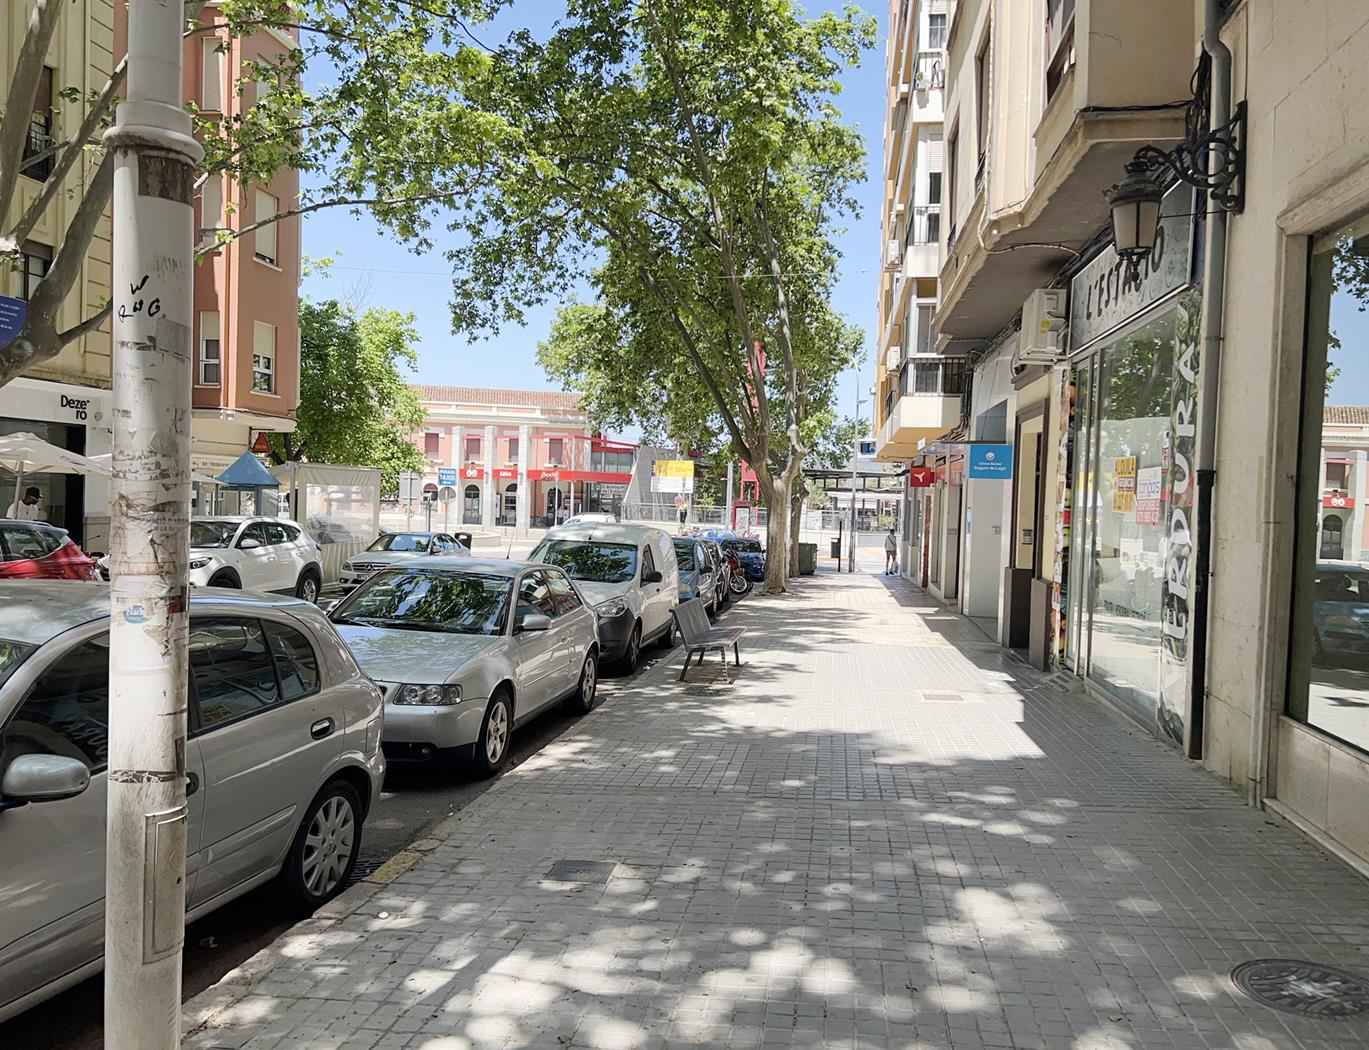 Investment.Excellent location in the center of Xátiva